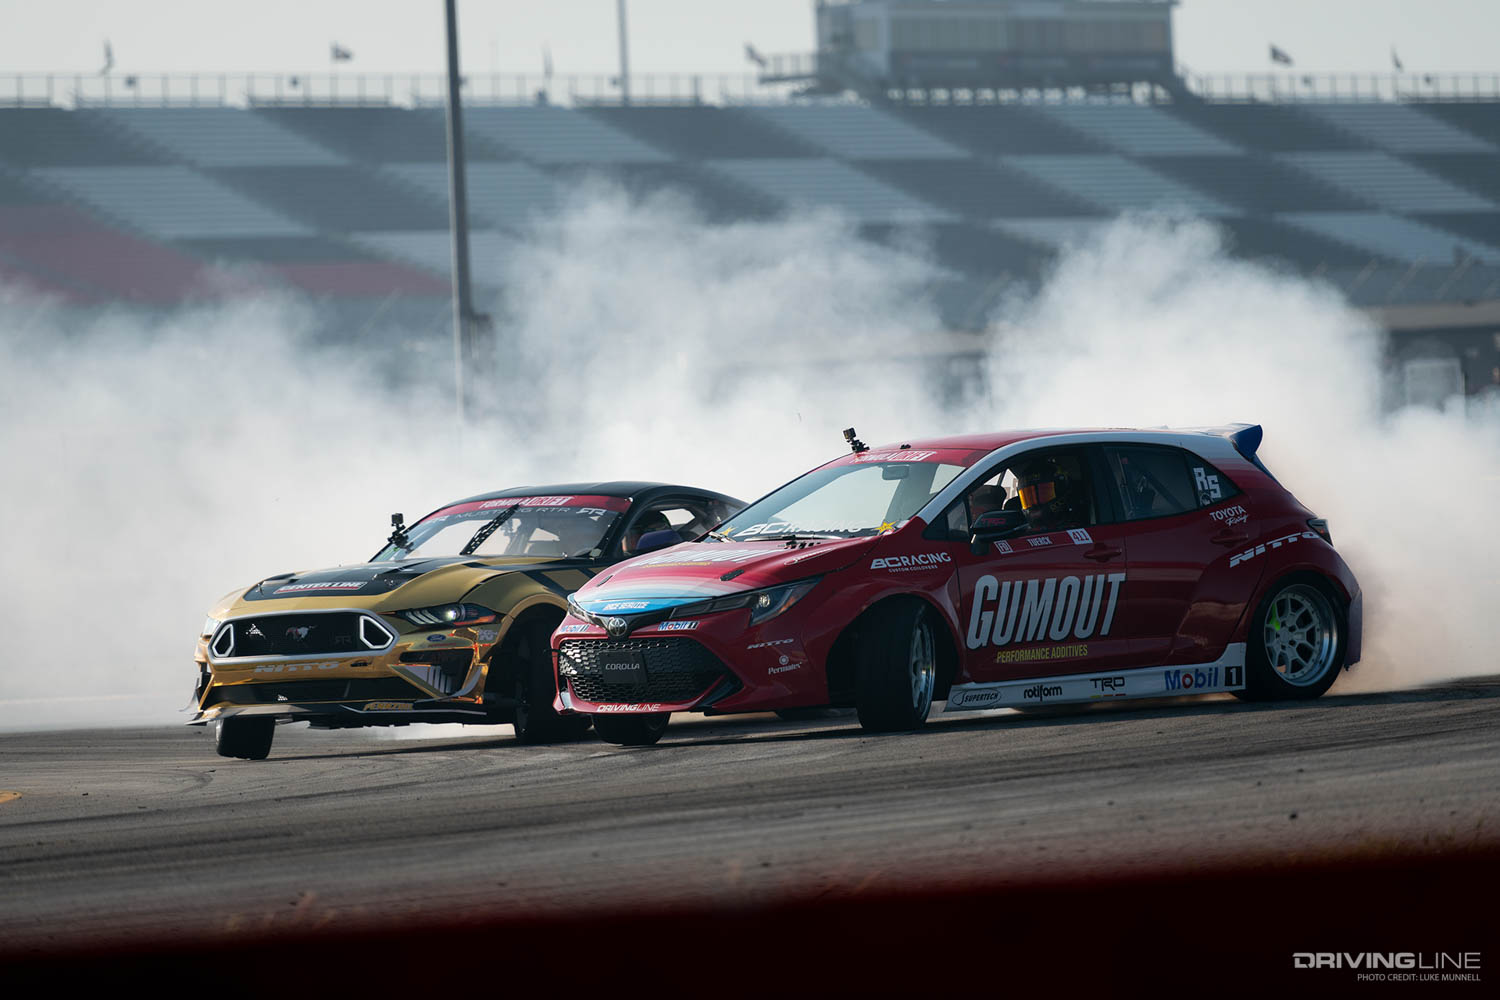 Formula Drift 2020 St. Louis Round 1 & 2: Event Results and Current Season Standings | DrivingLine